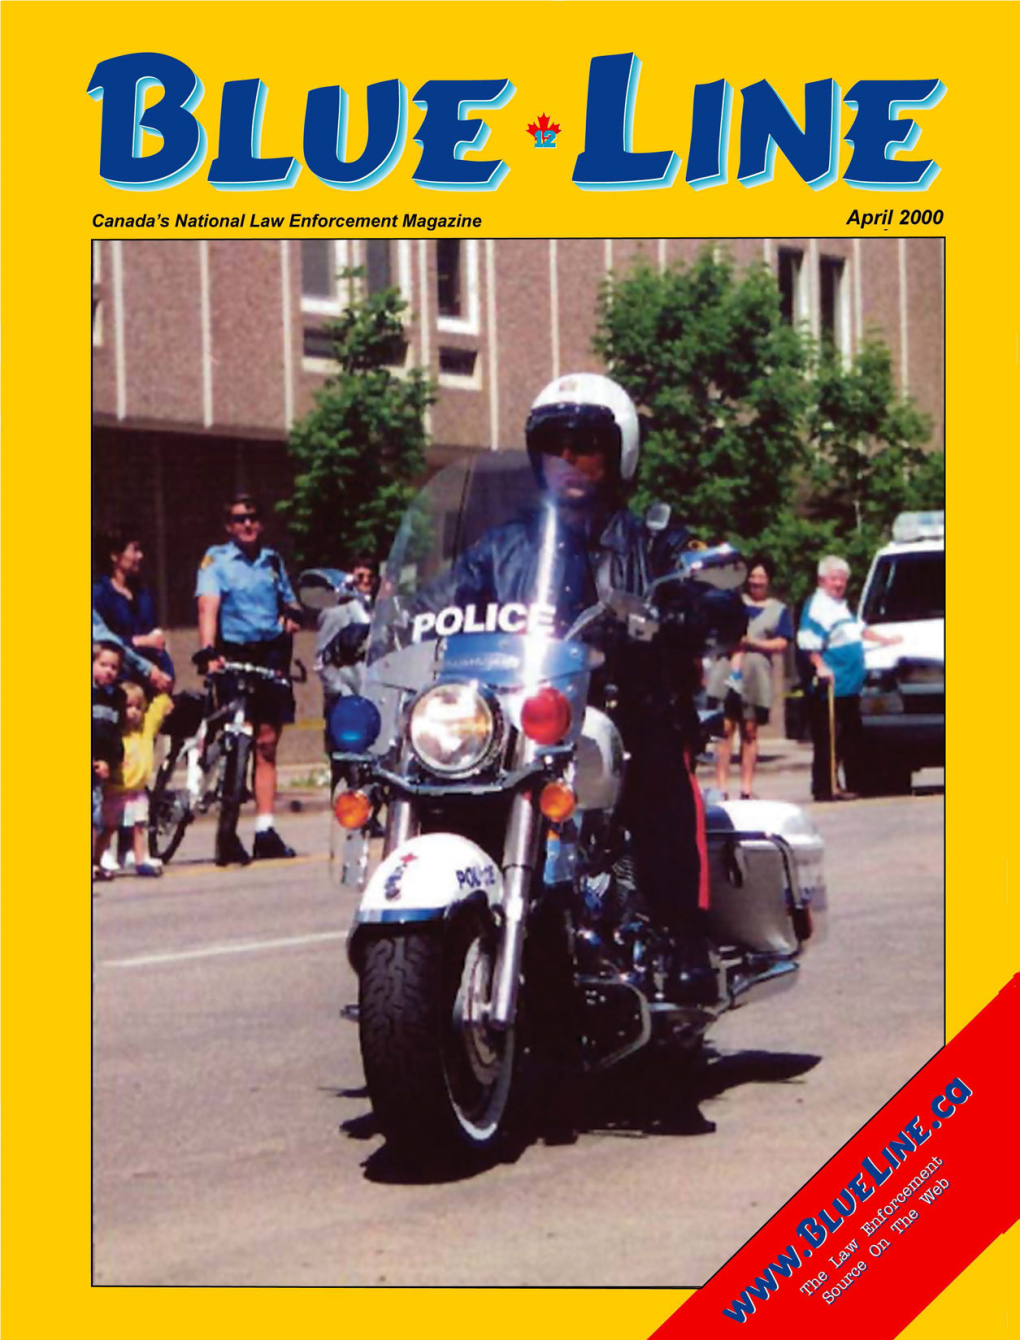 Canada's National Law Enforcement Magazine Apr~/2000 • POWERFUL PRE-FOCUSED XENON LAMPS • CHEMICALLY RESISTANT XENOY®BODIES • ALL WEATHER RUBBER GRIPS